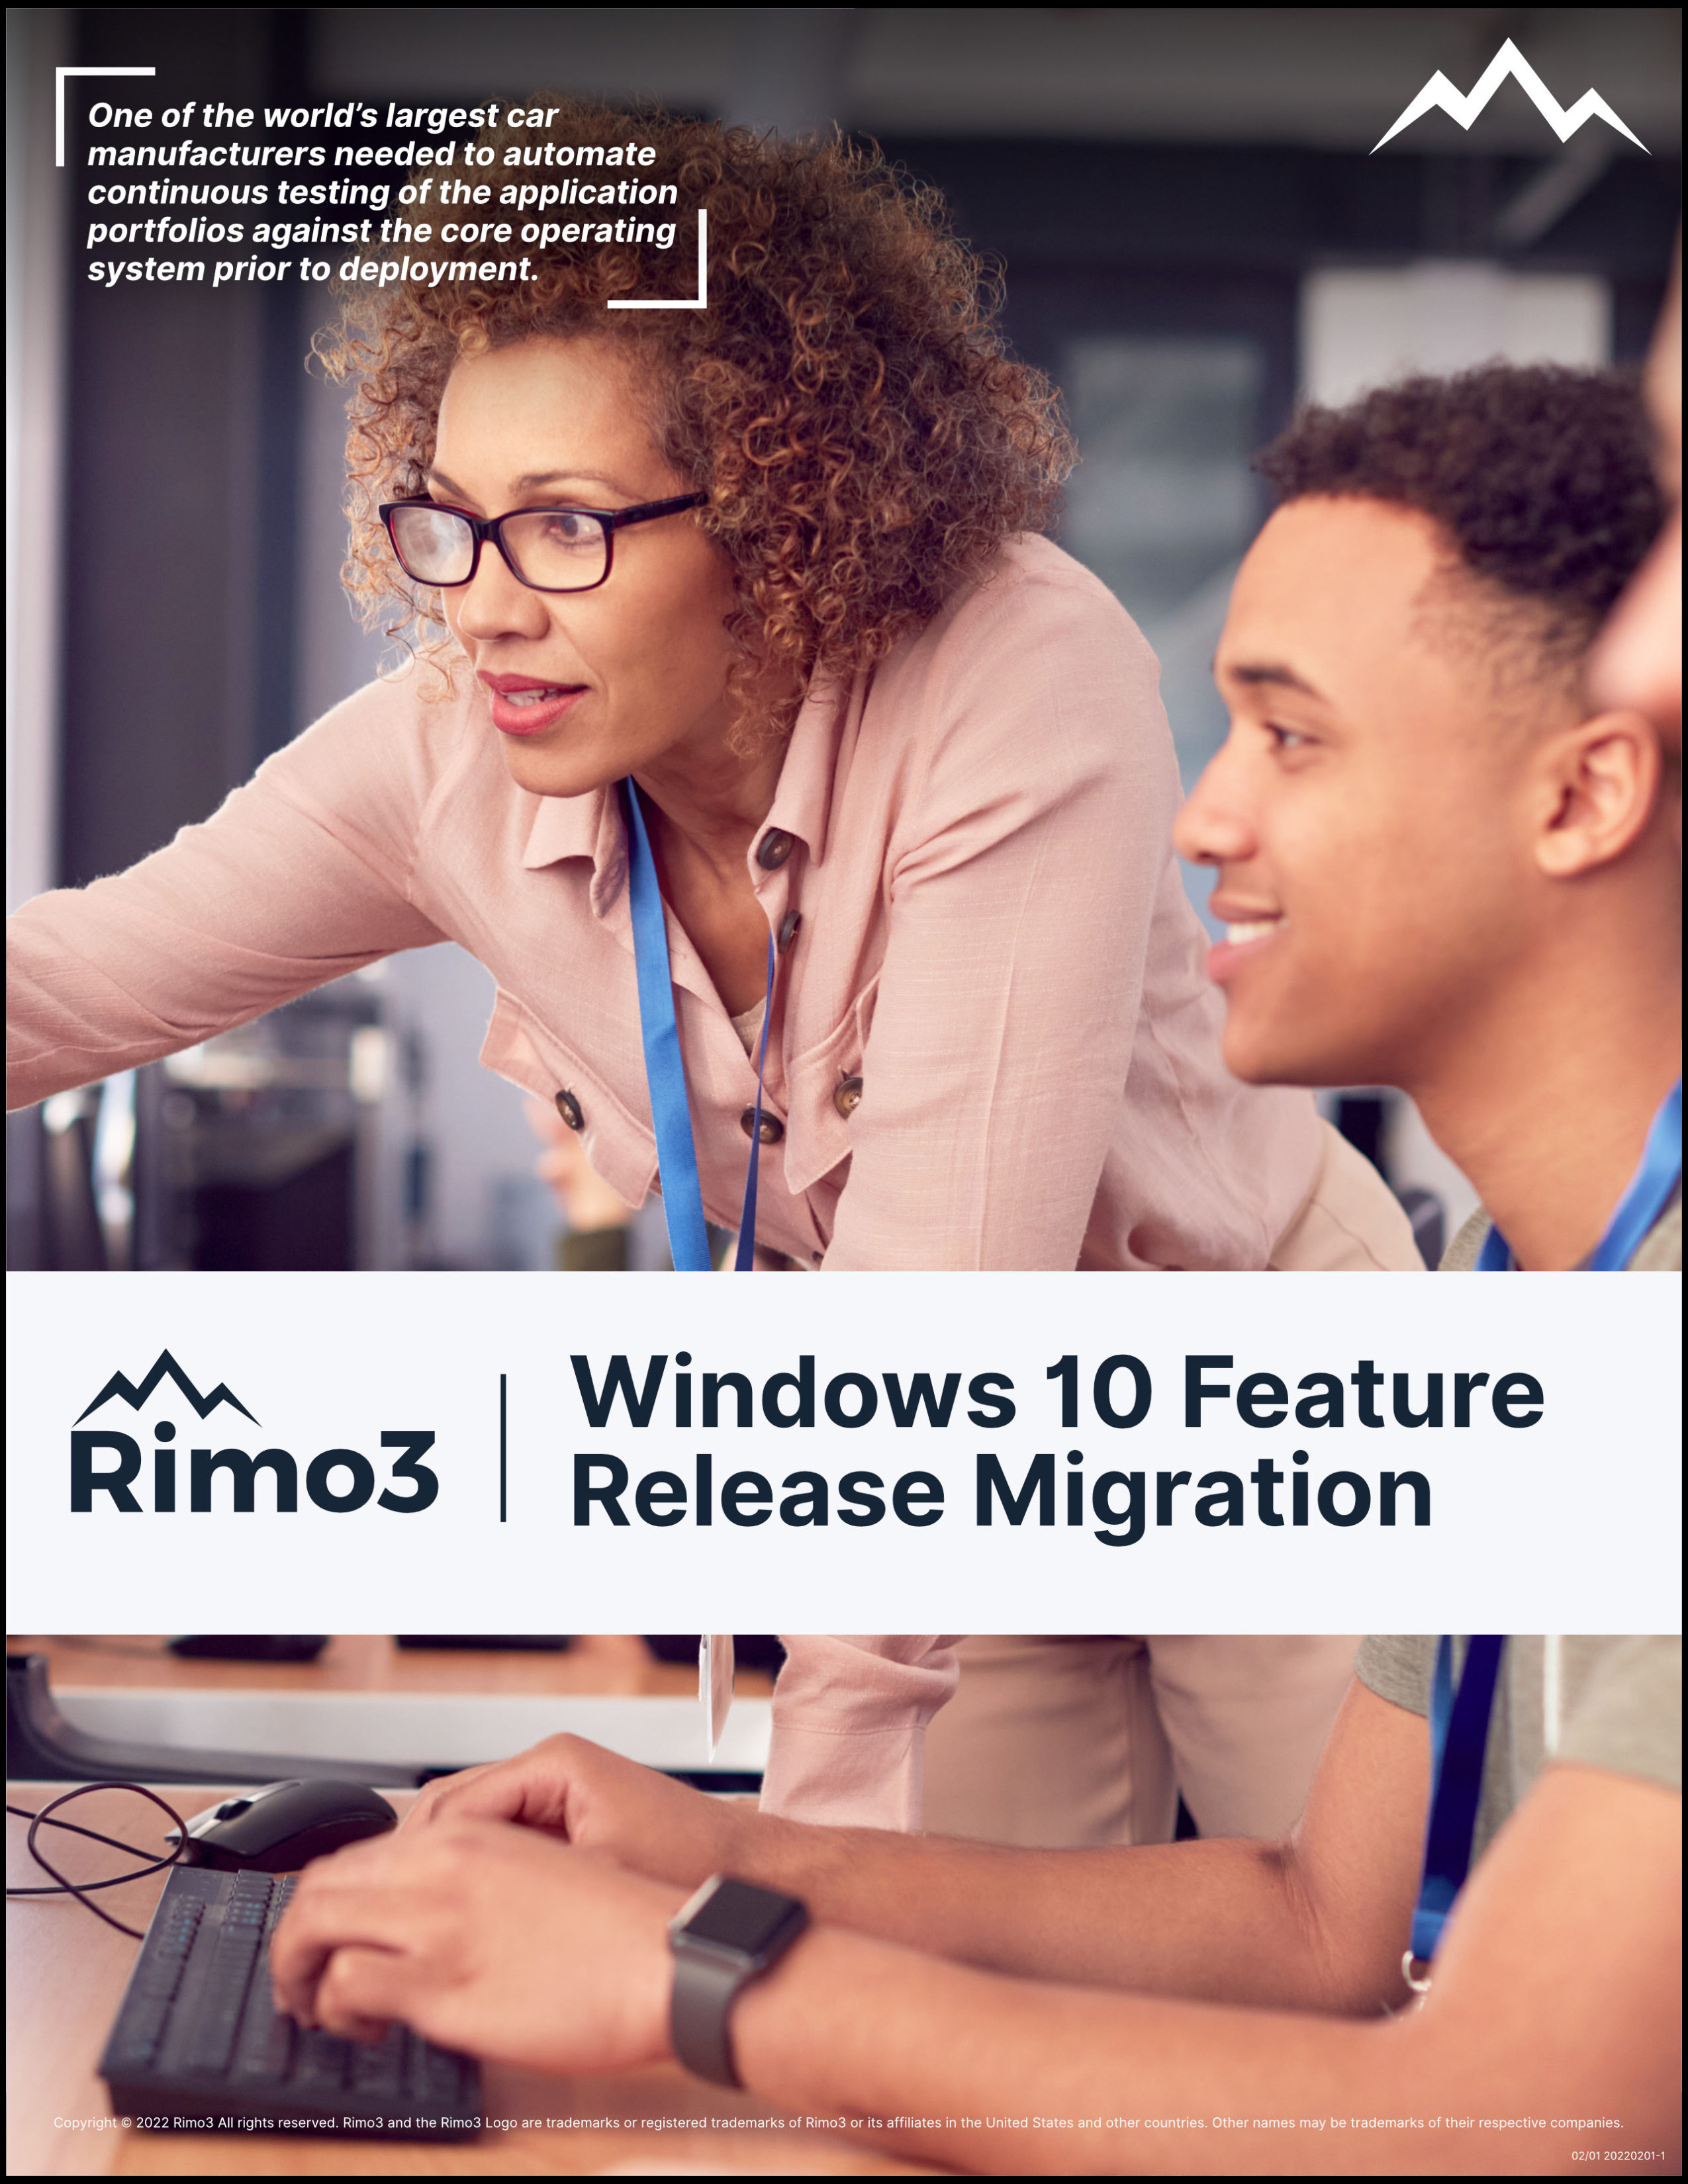 Rimo3 Windows 10 Feature Release Migration Page 1-1